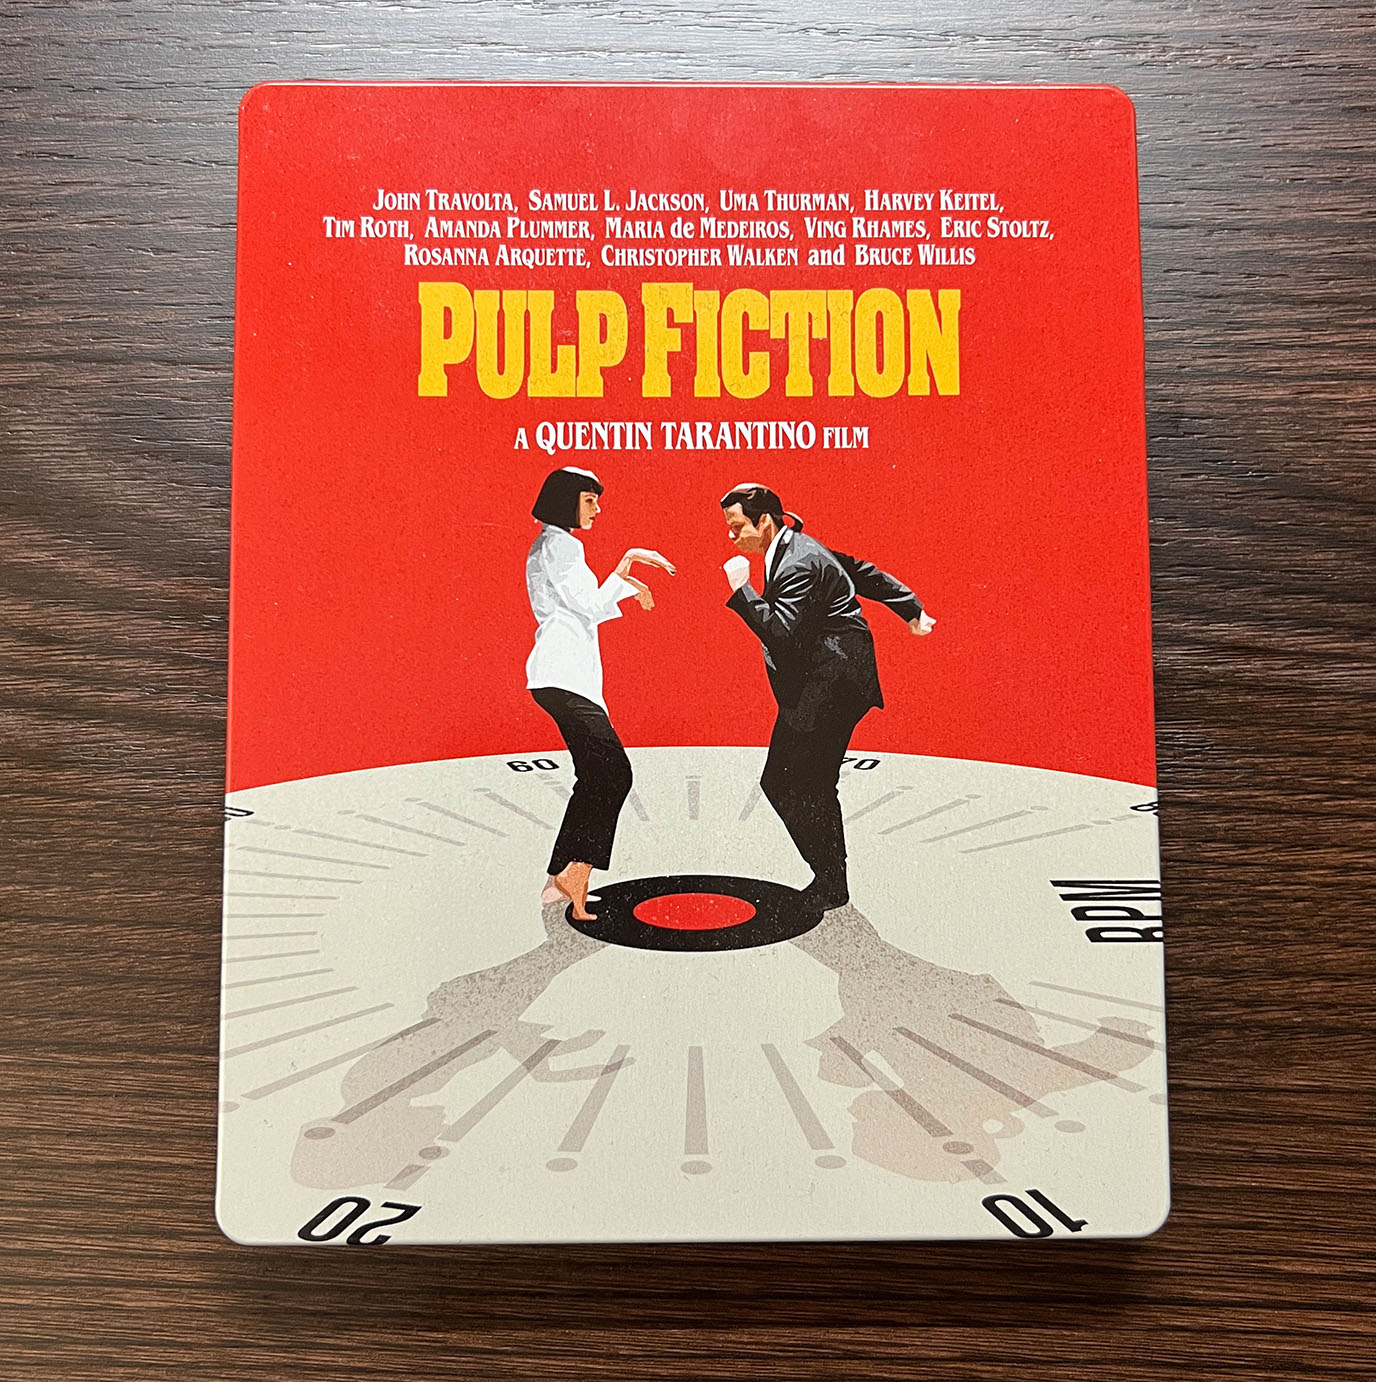 [Review] Pulp Fiction (4K Ultra HD Blu-Ray & Blu-Ray) Limited Steelbook Edition